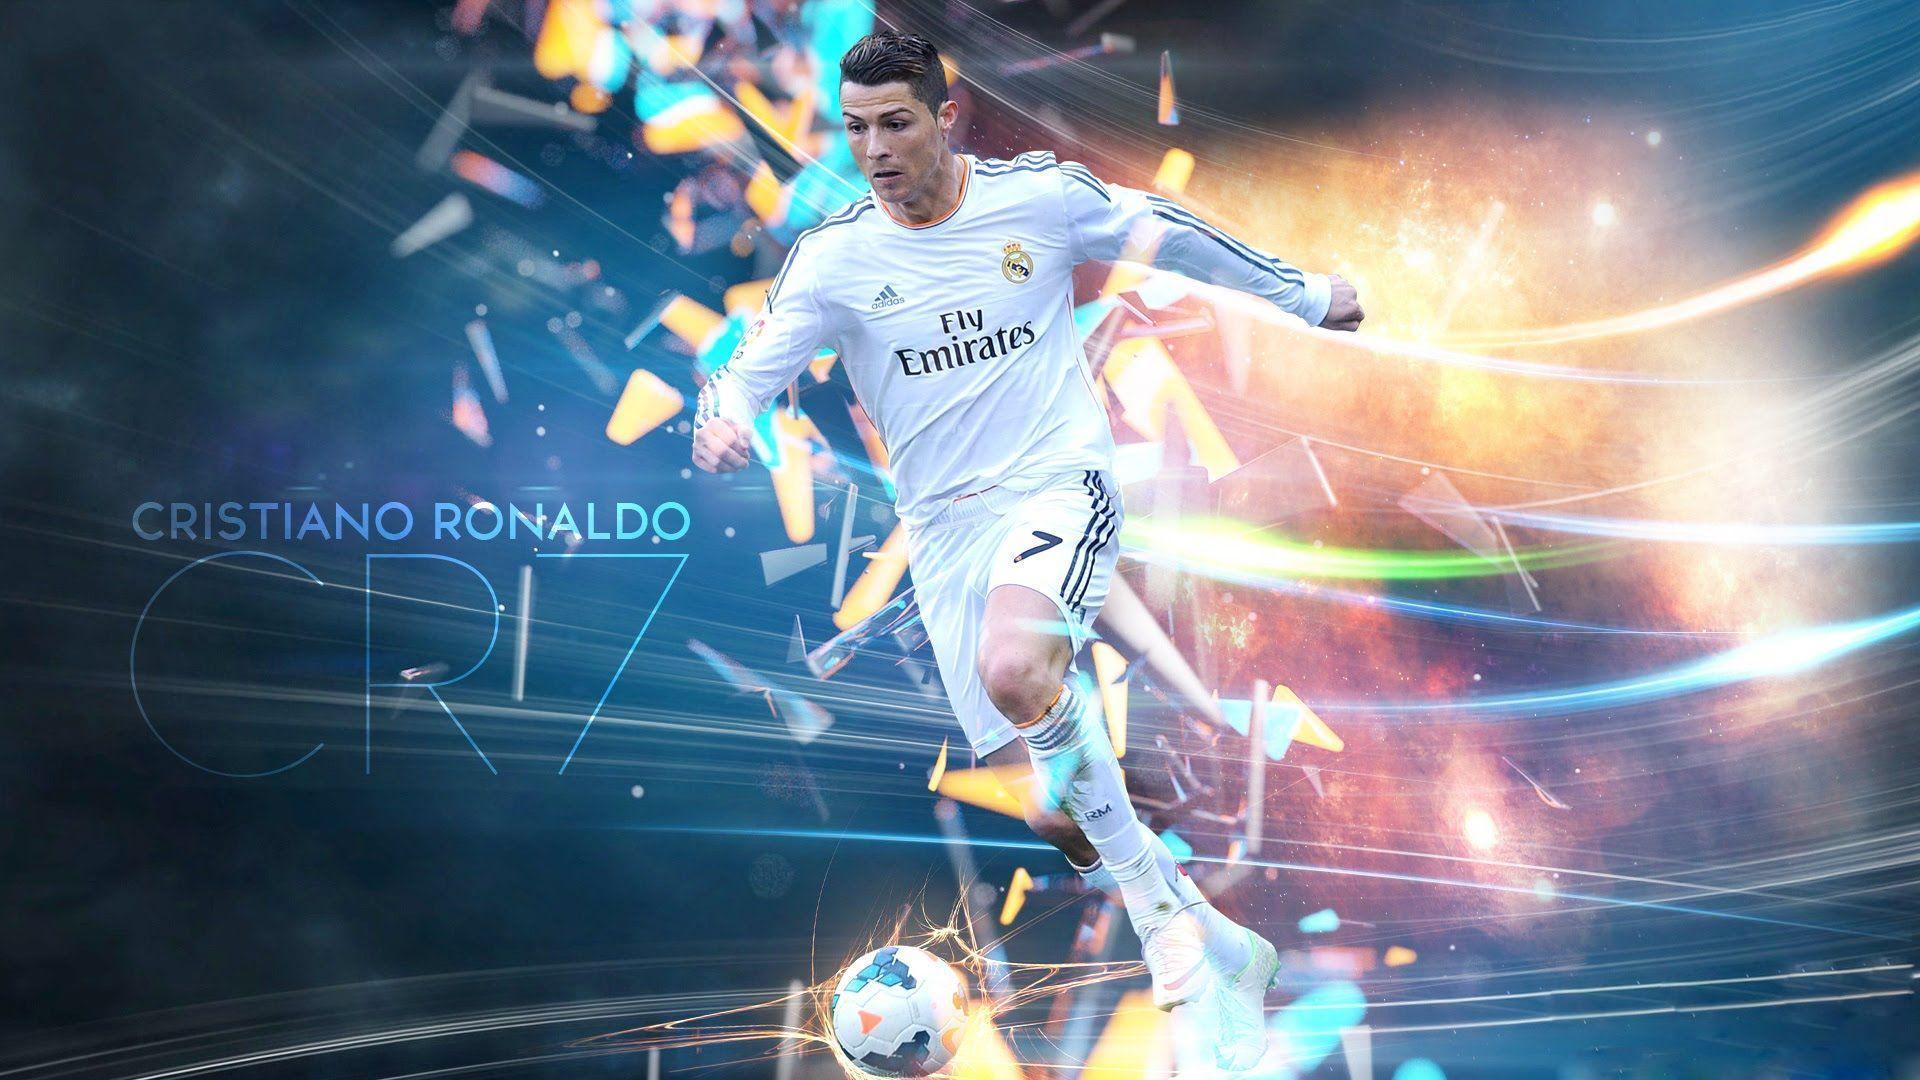 Cristiano Ronaldo Full HD Wallpapers 2016 For download